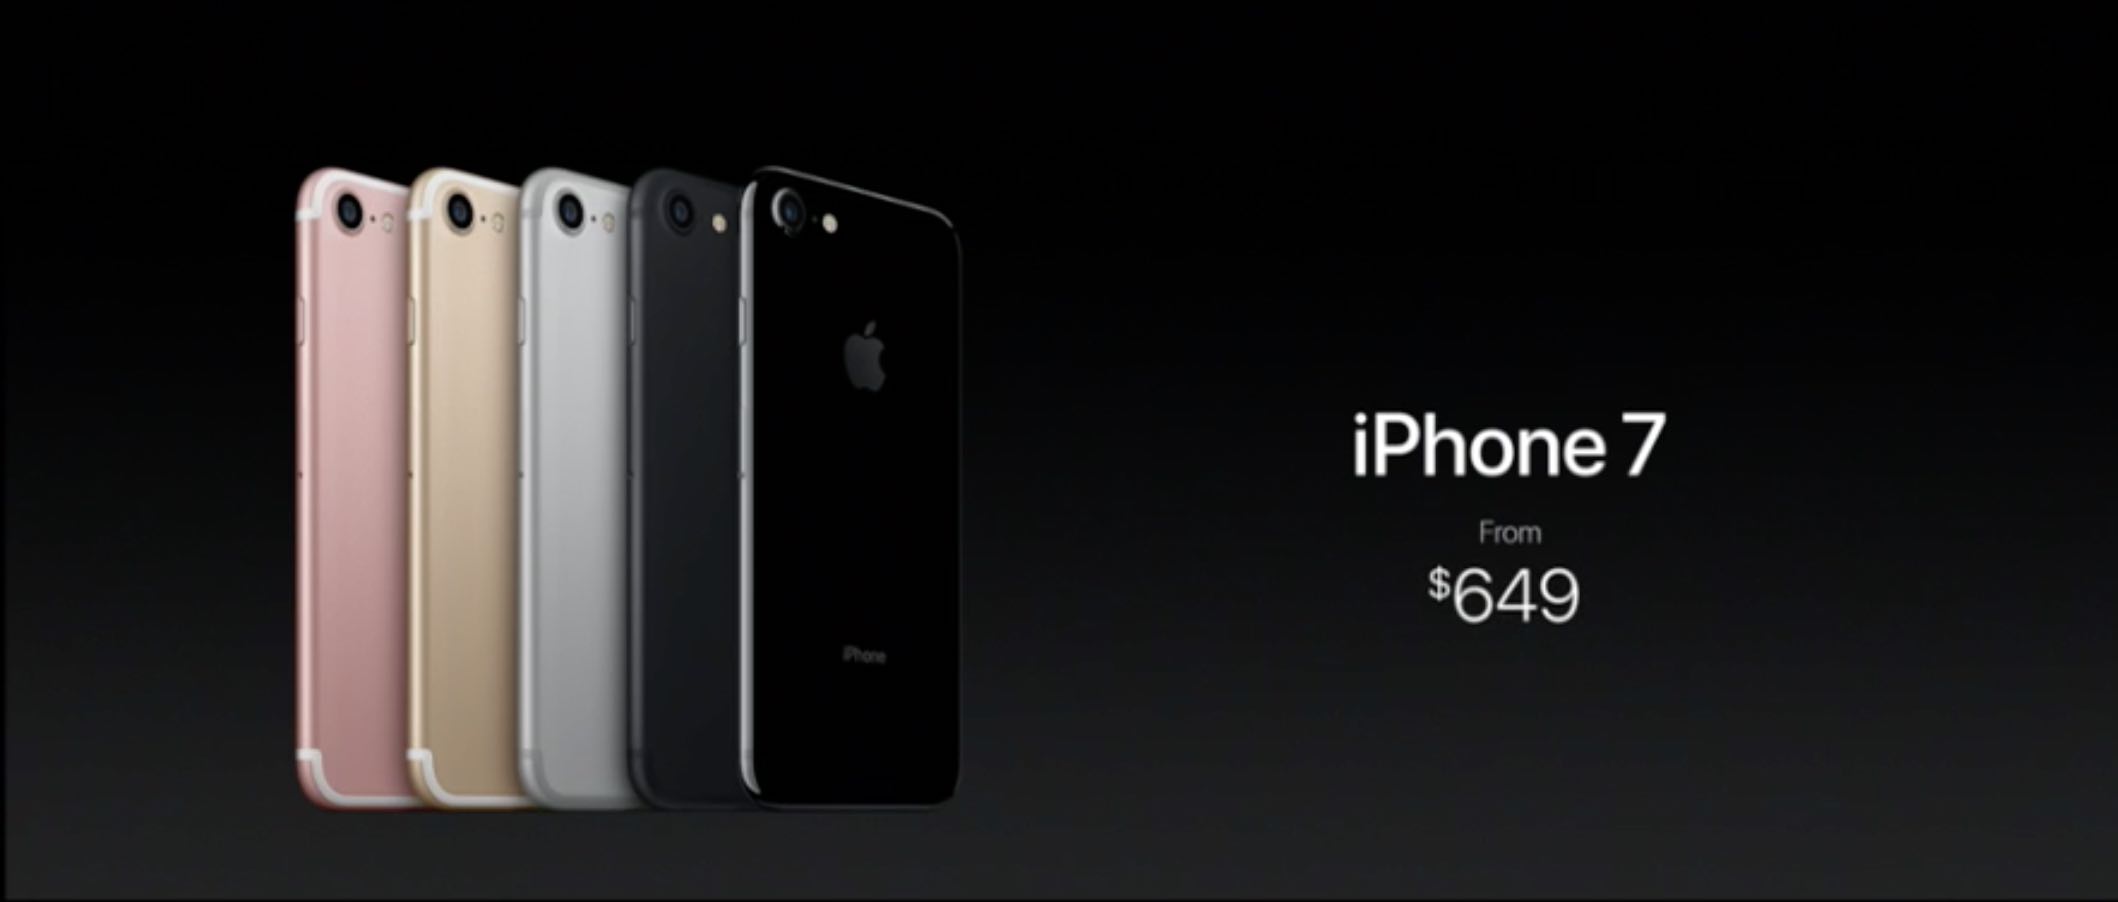 Pictures of the iPhone 7